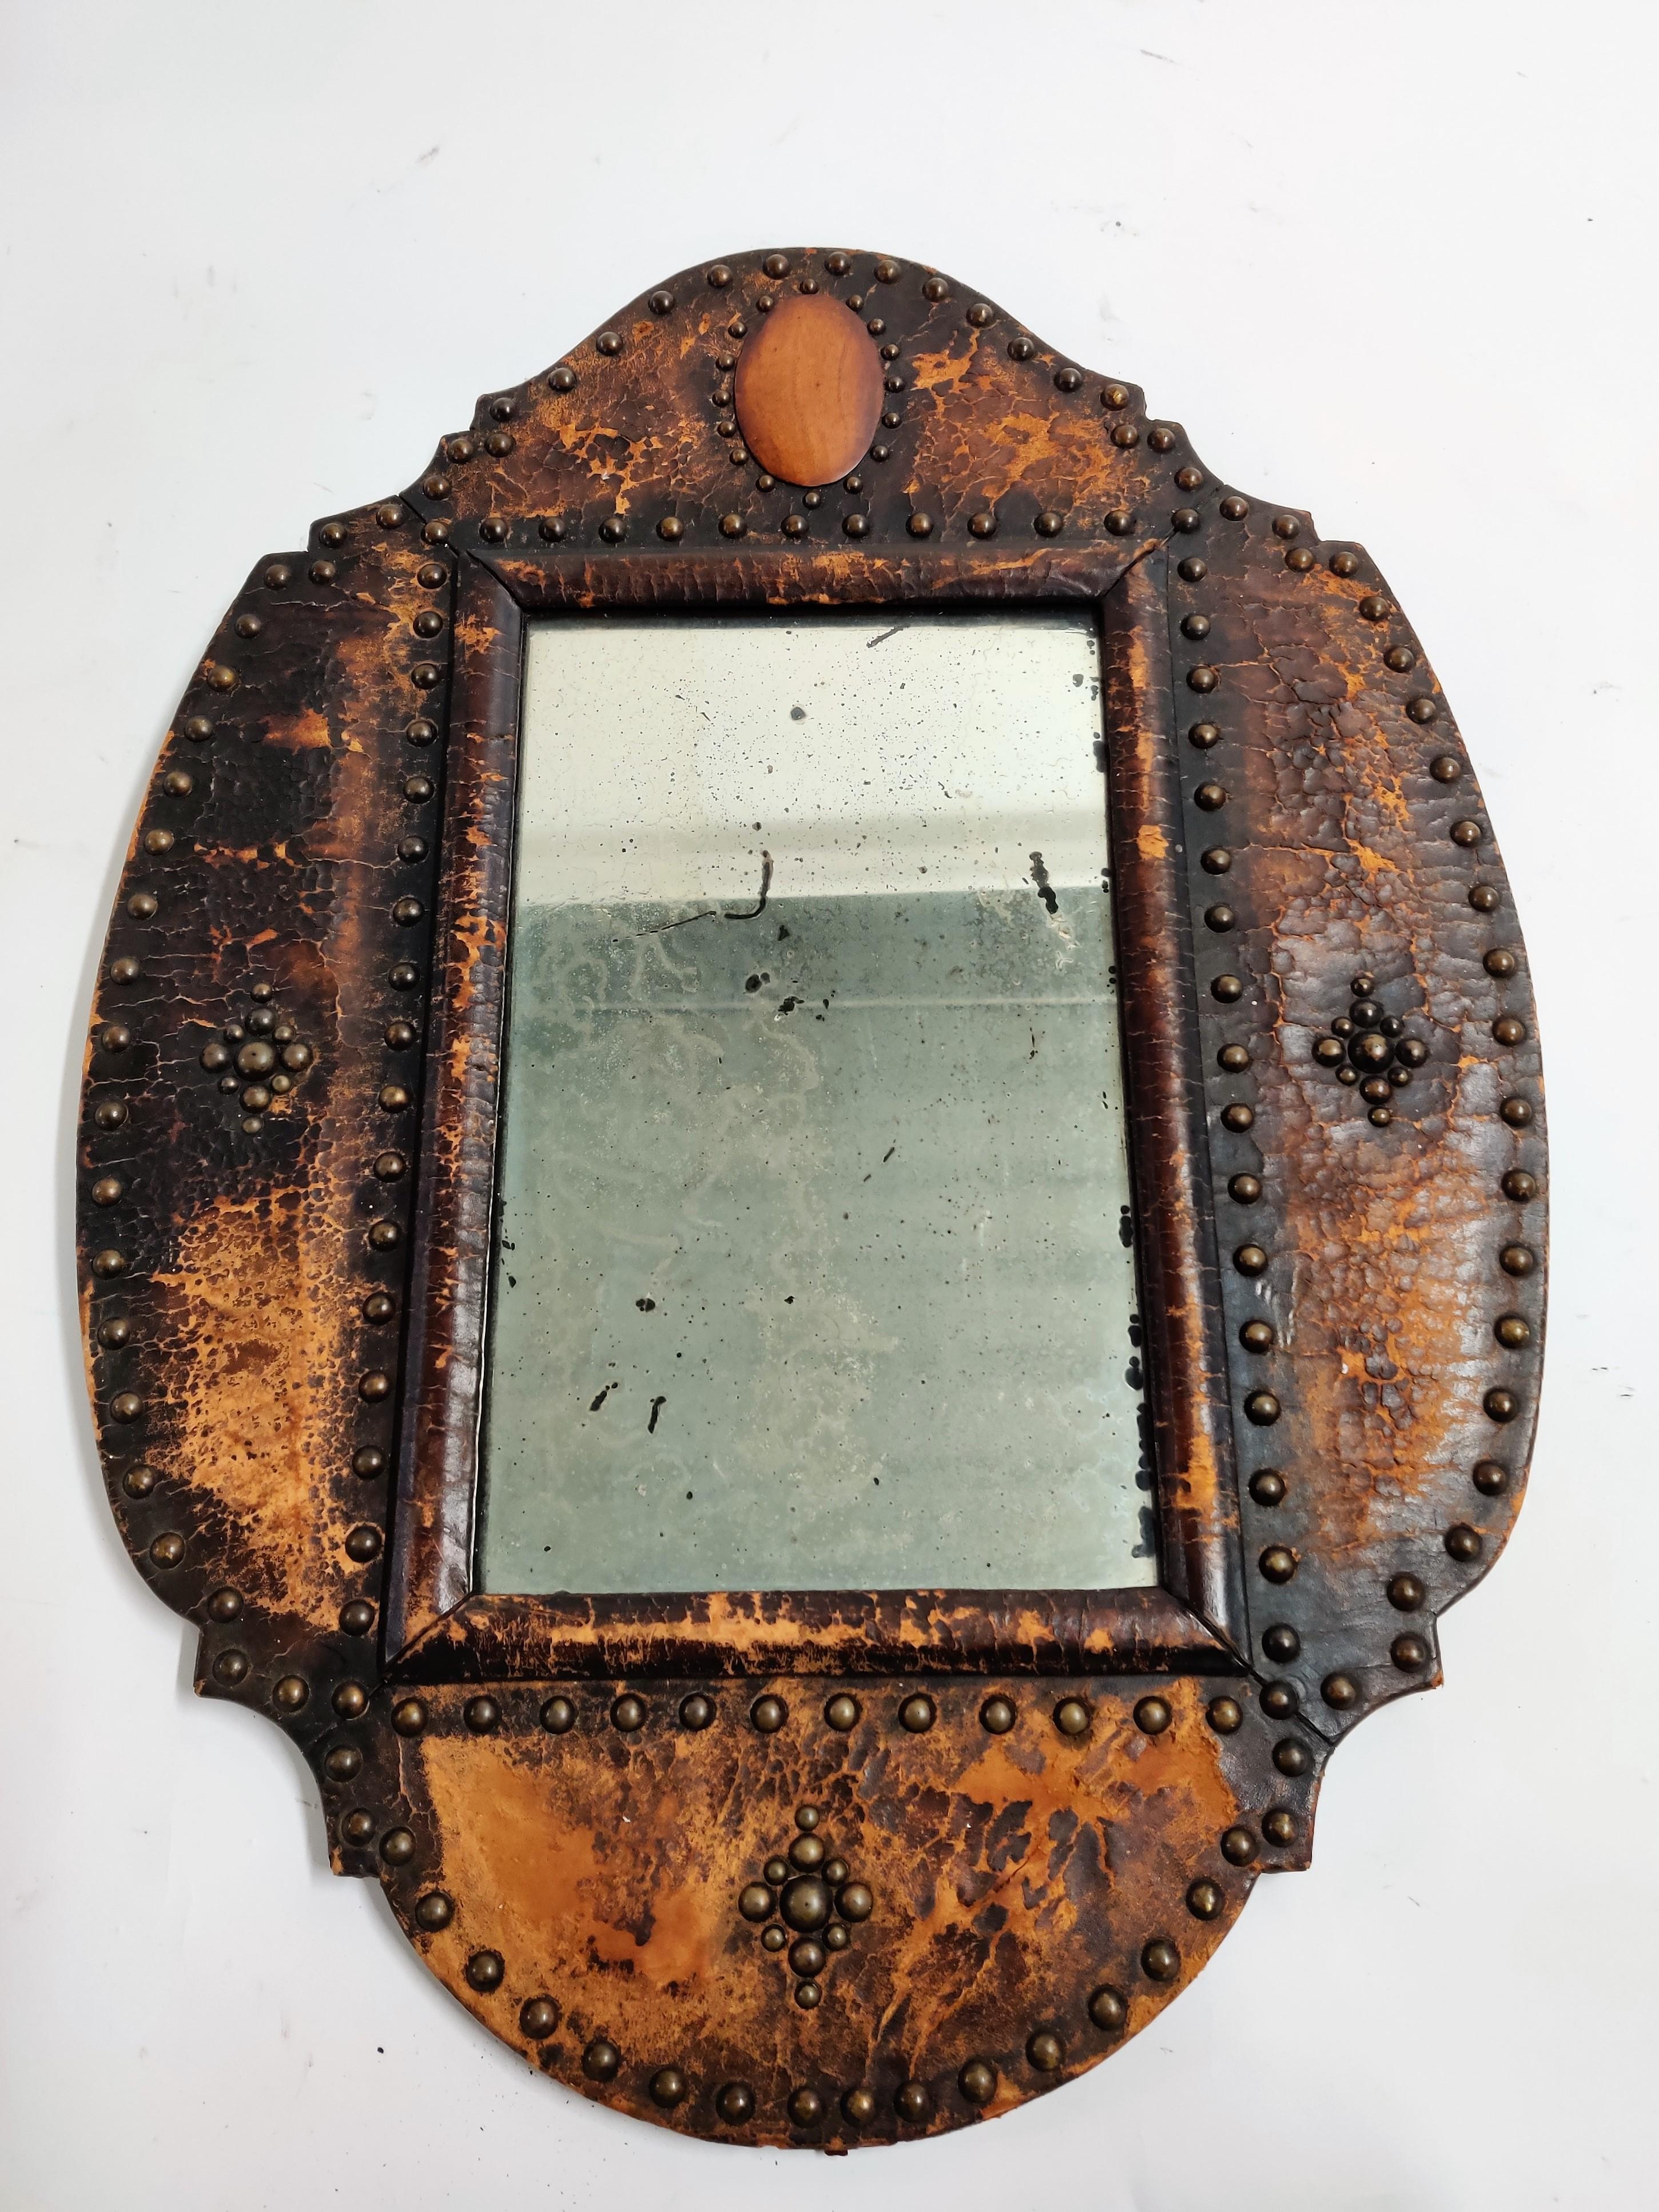 Mid-19th century leather mirror.

This mirror has aged in a beautiful way with worn leather and a patinated mirror.

Very decorative and characteristic piece.

1850s, France

Measures: Height 70 cm/27.5